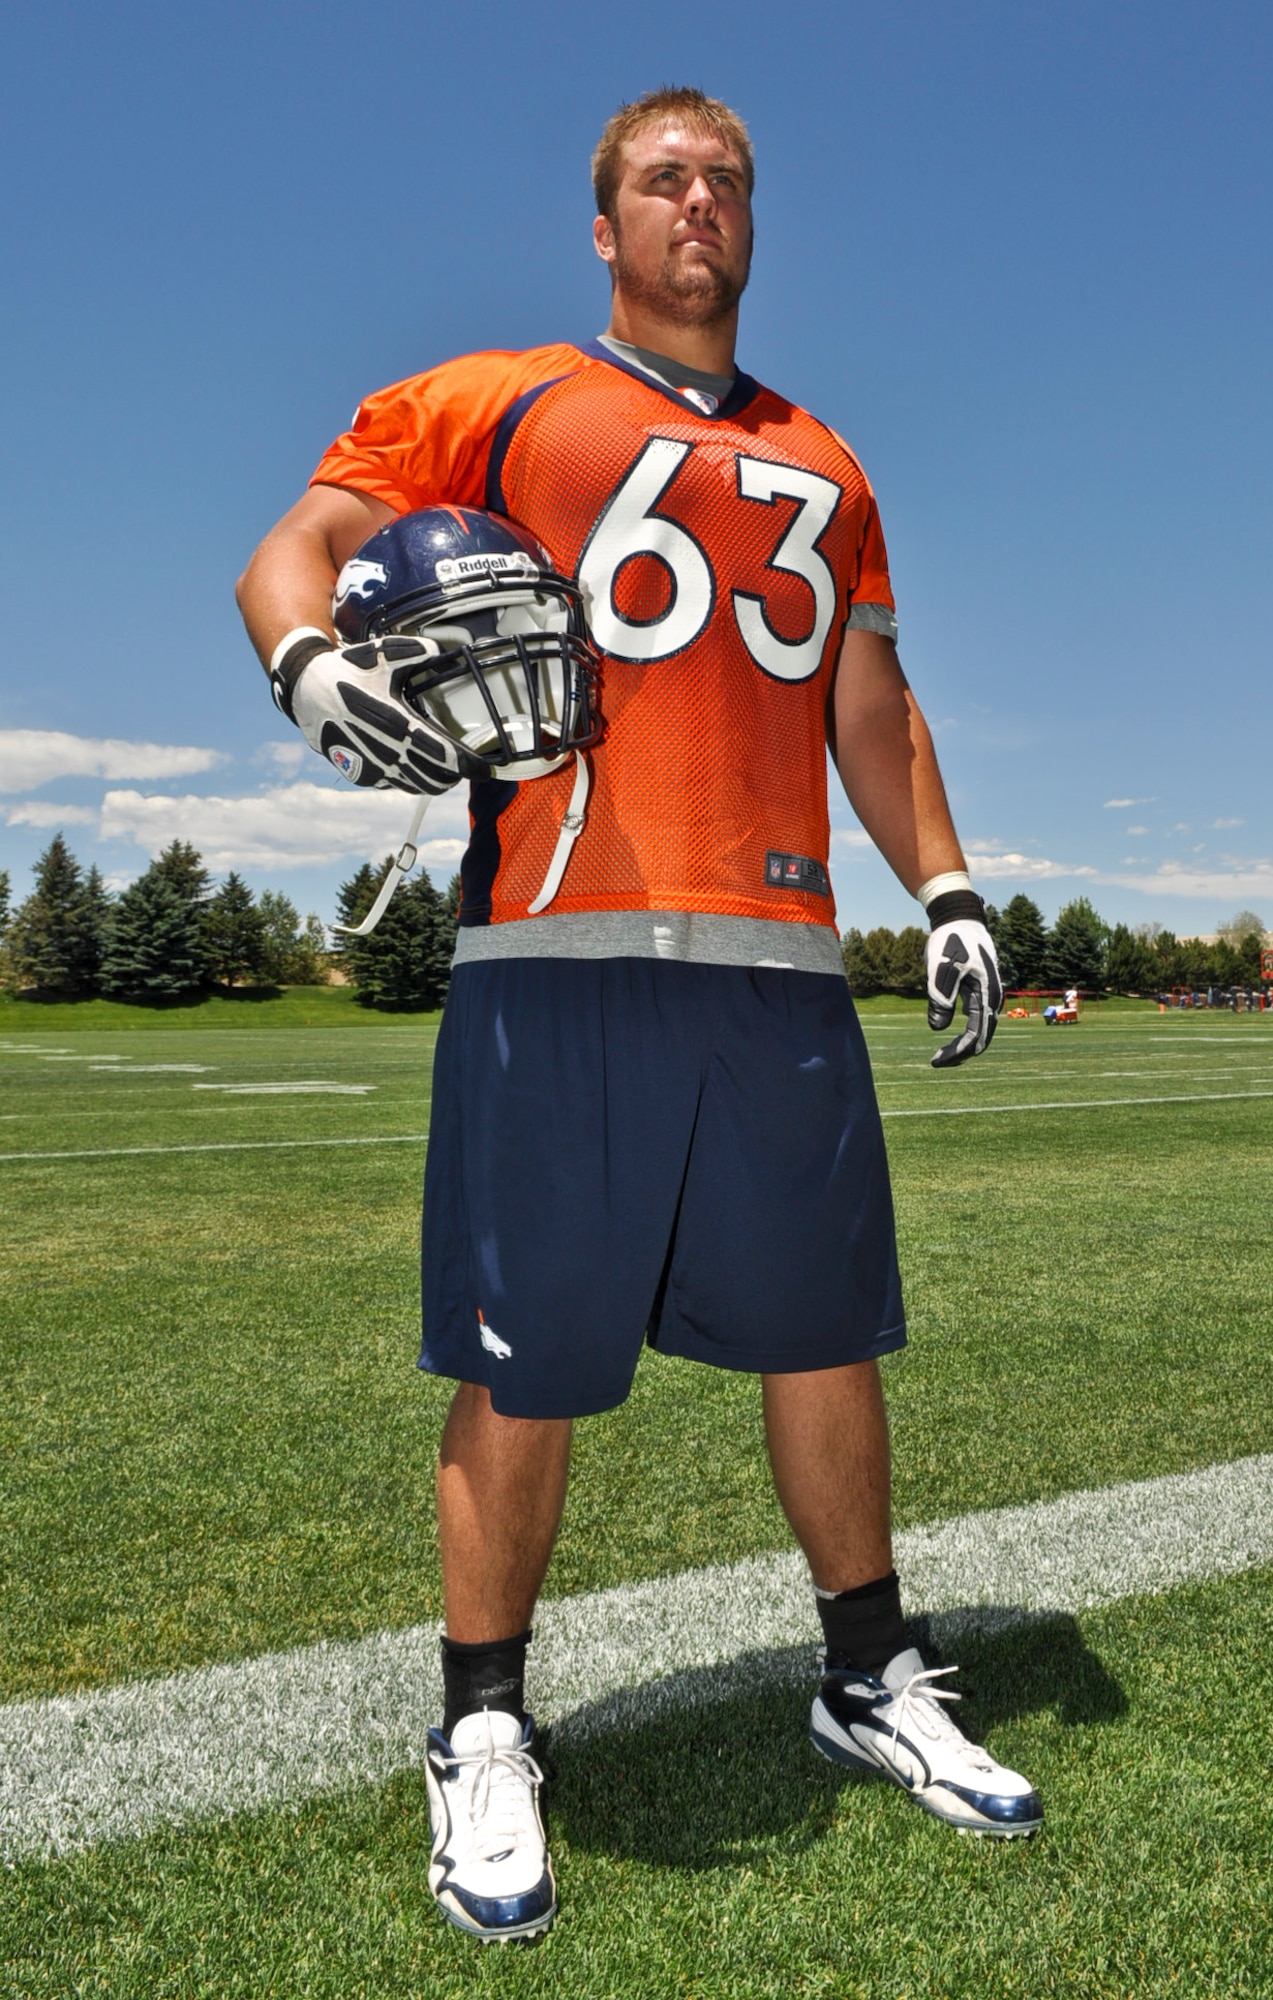 ENGLEWOOD, Colo. – Denver Broncos defensive end Benjamin Garland poses for a photo following mini-camp session June 13, 2012. Garland graduated with the Air Force Academy Class of 2010 and began his Air Force career as a strength and conditioning coach for the academy. He is currently assigned to the 140 Wing Public Affairs Office, Colorado Air National Guard. (U.S. Air Force photo by Senior Airman Christopher Gross)